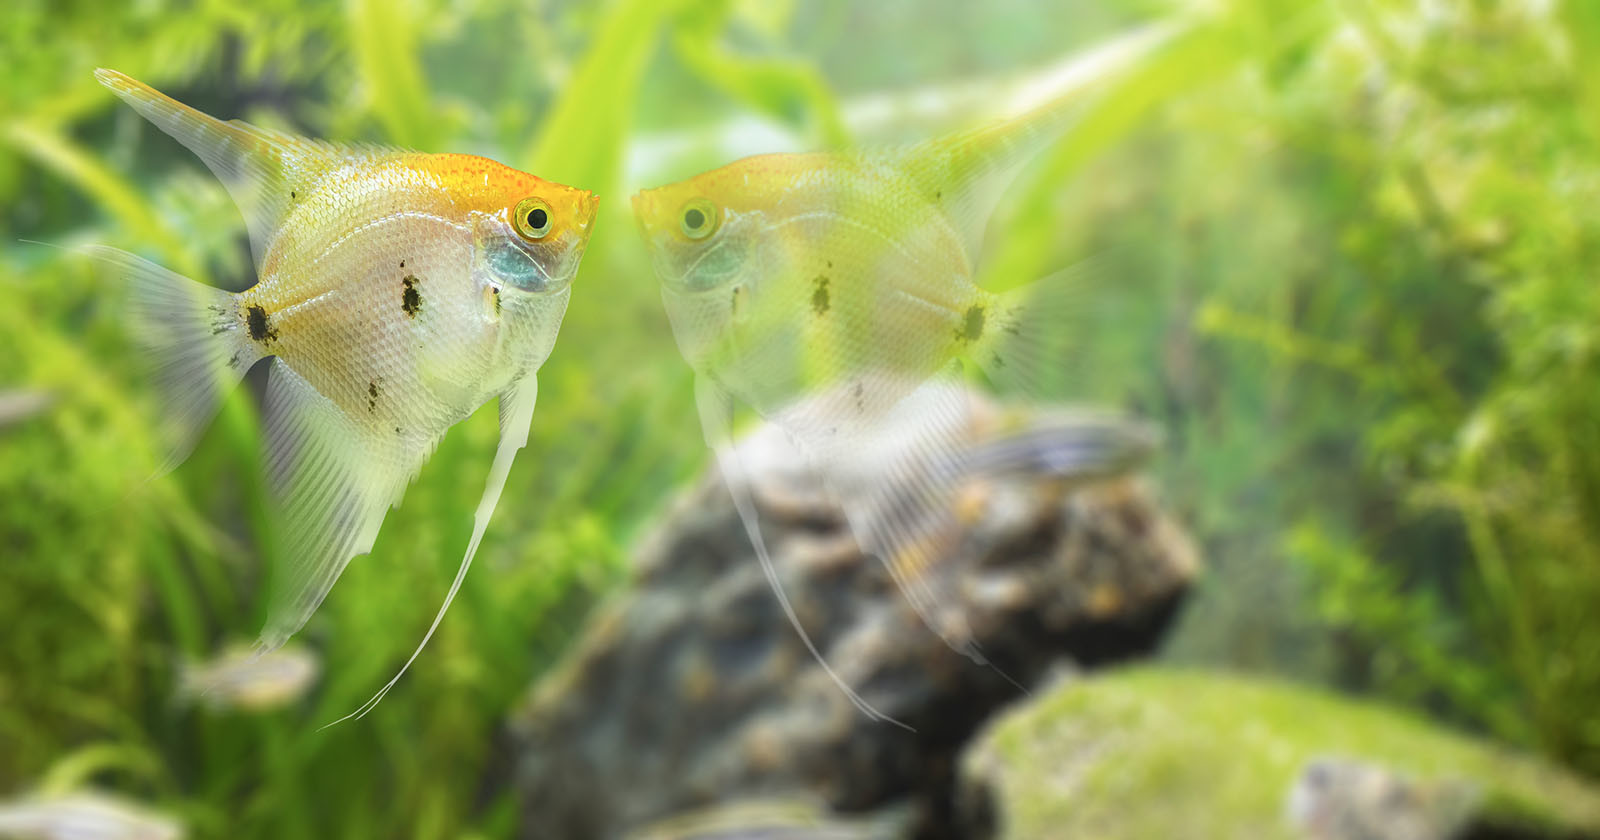  fish can recognize themselves photos study finds 